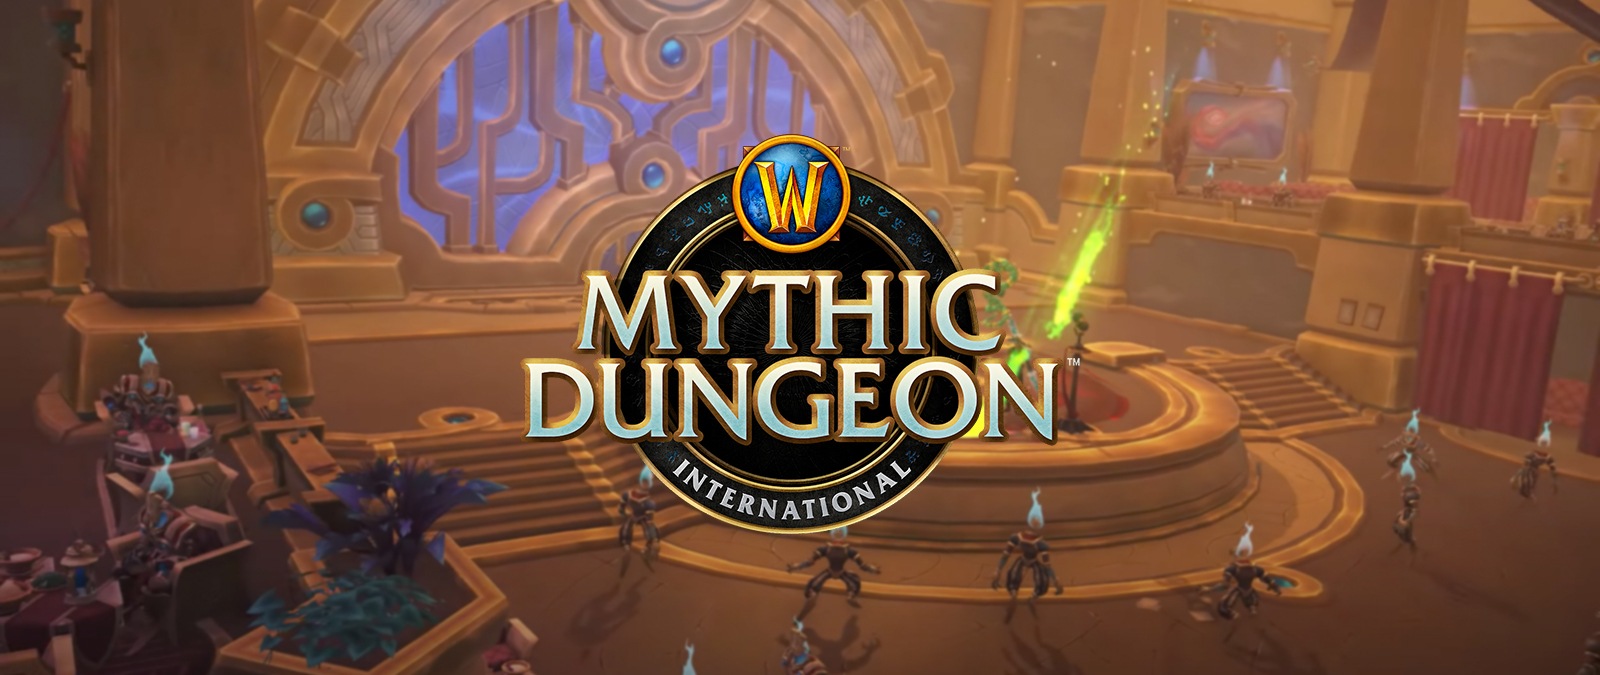 Mythic Dungeon International Last Stand Viewer’s Guide 